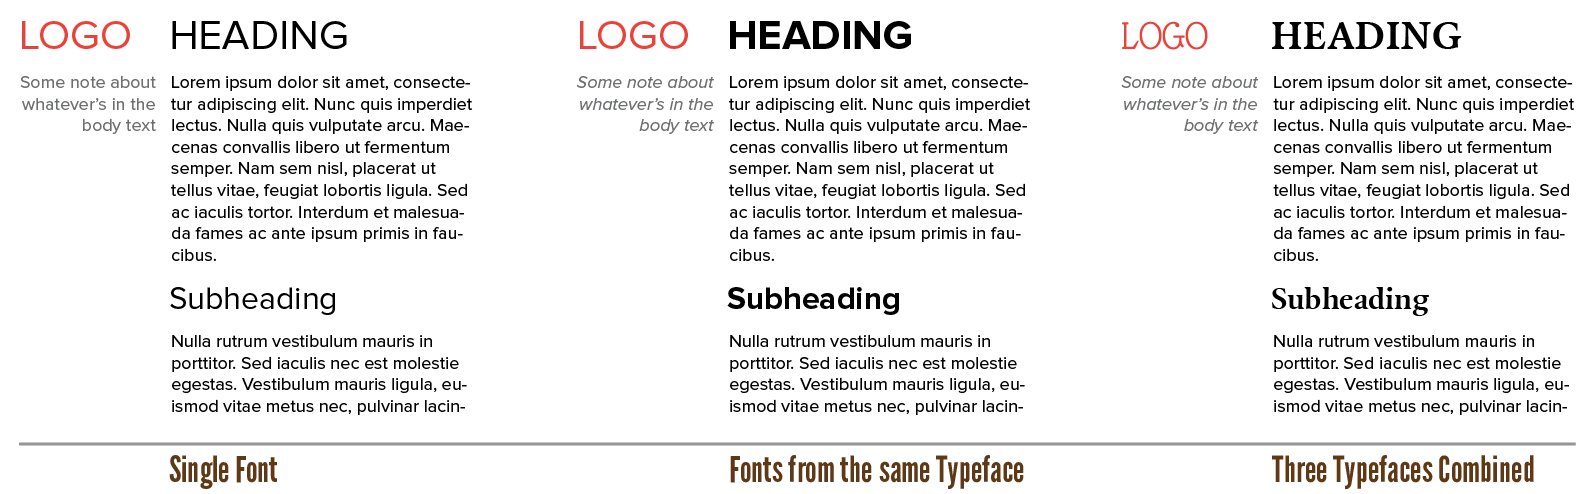 An example of picking one typeface, multiple fonts, or multiple different typefaces